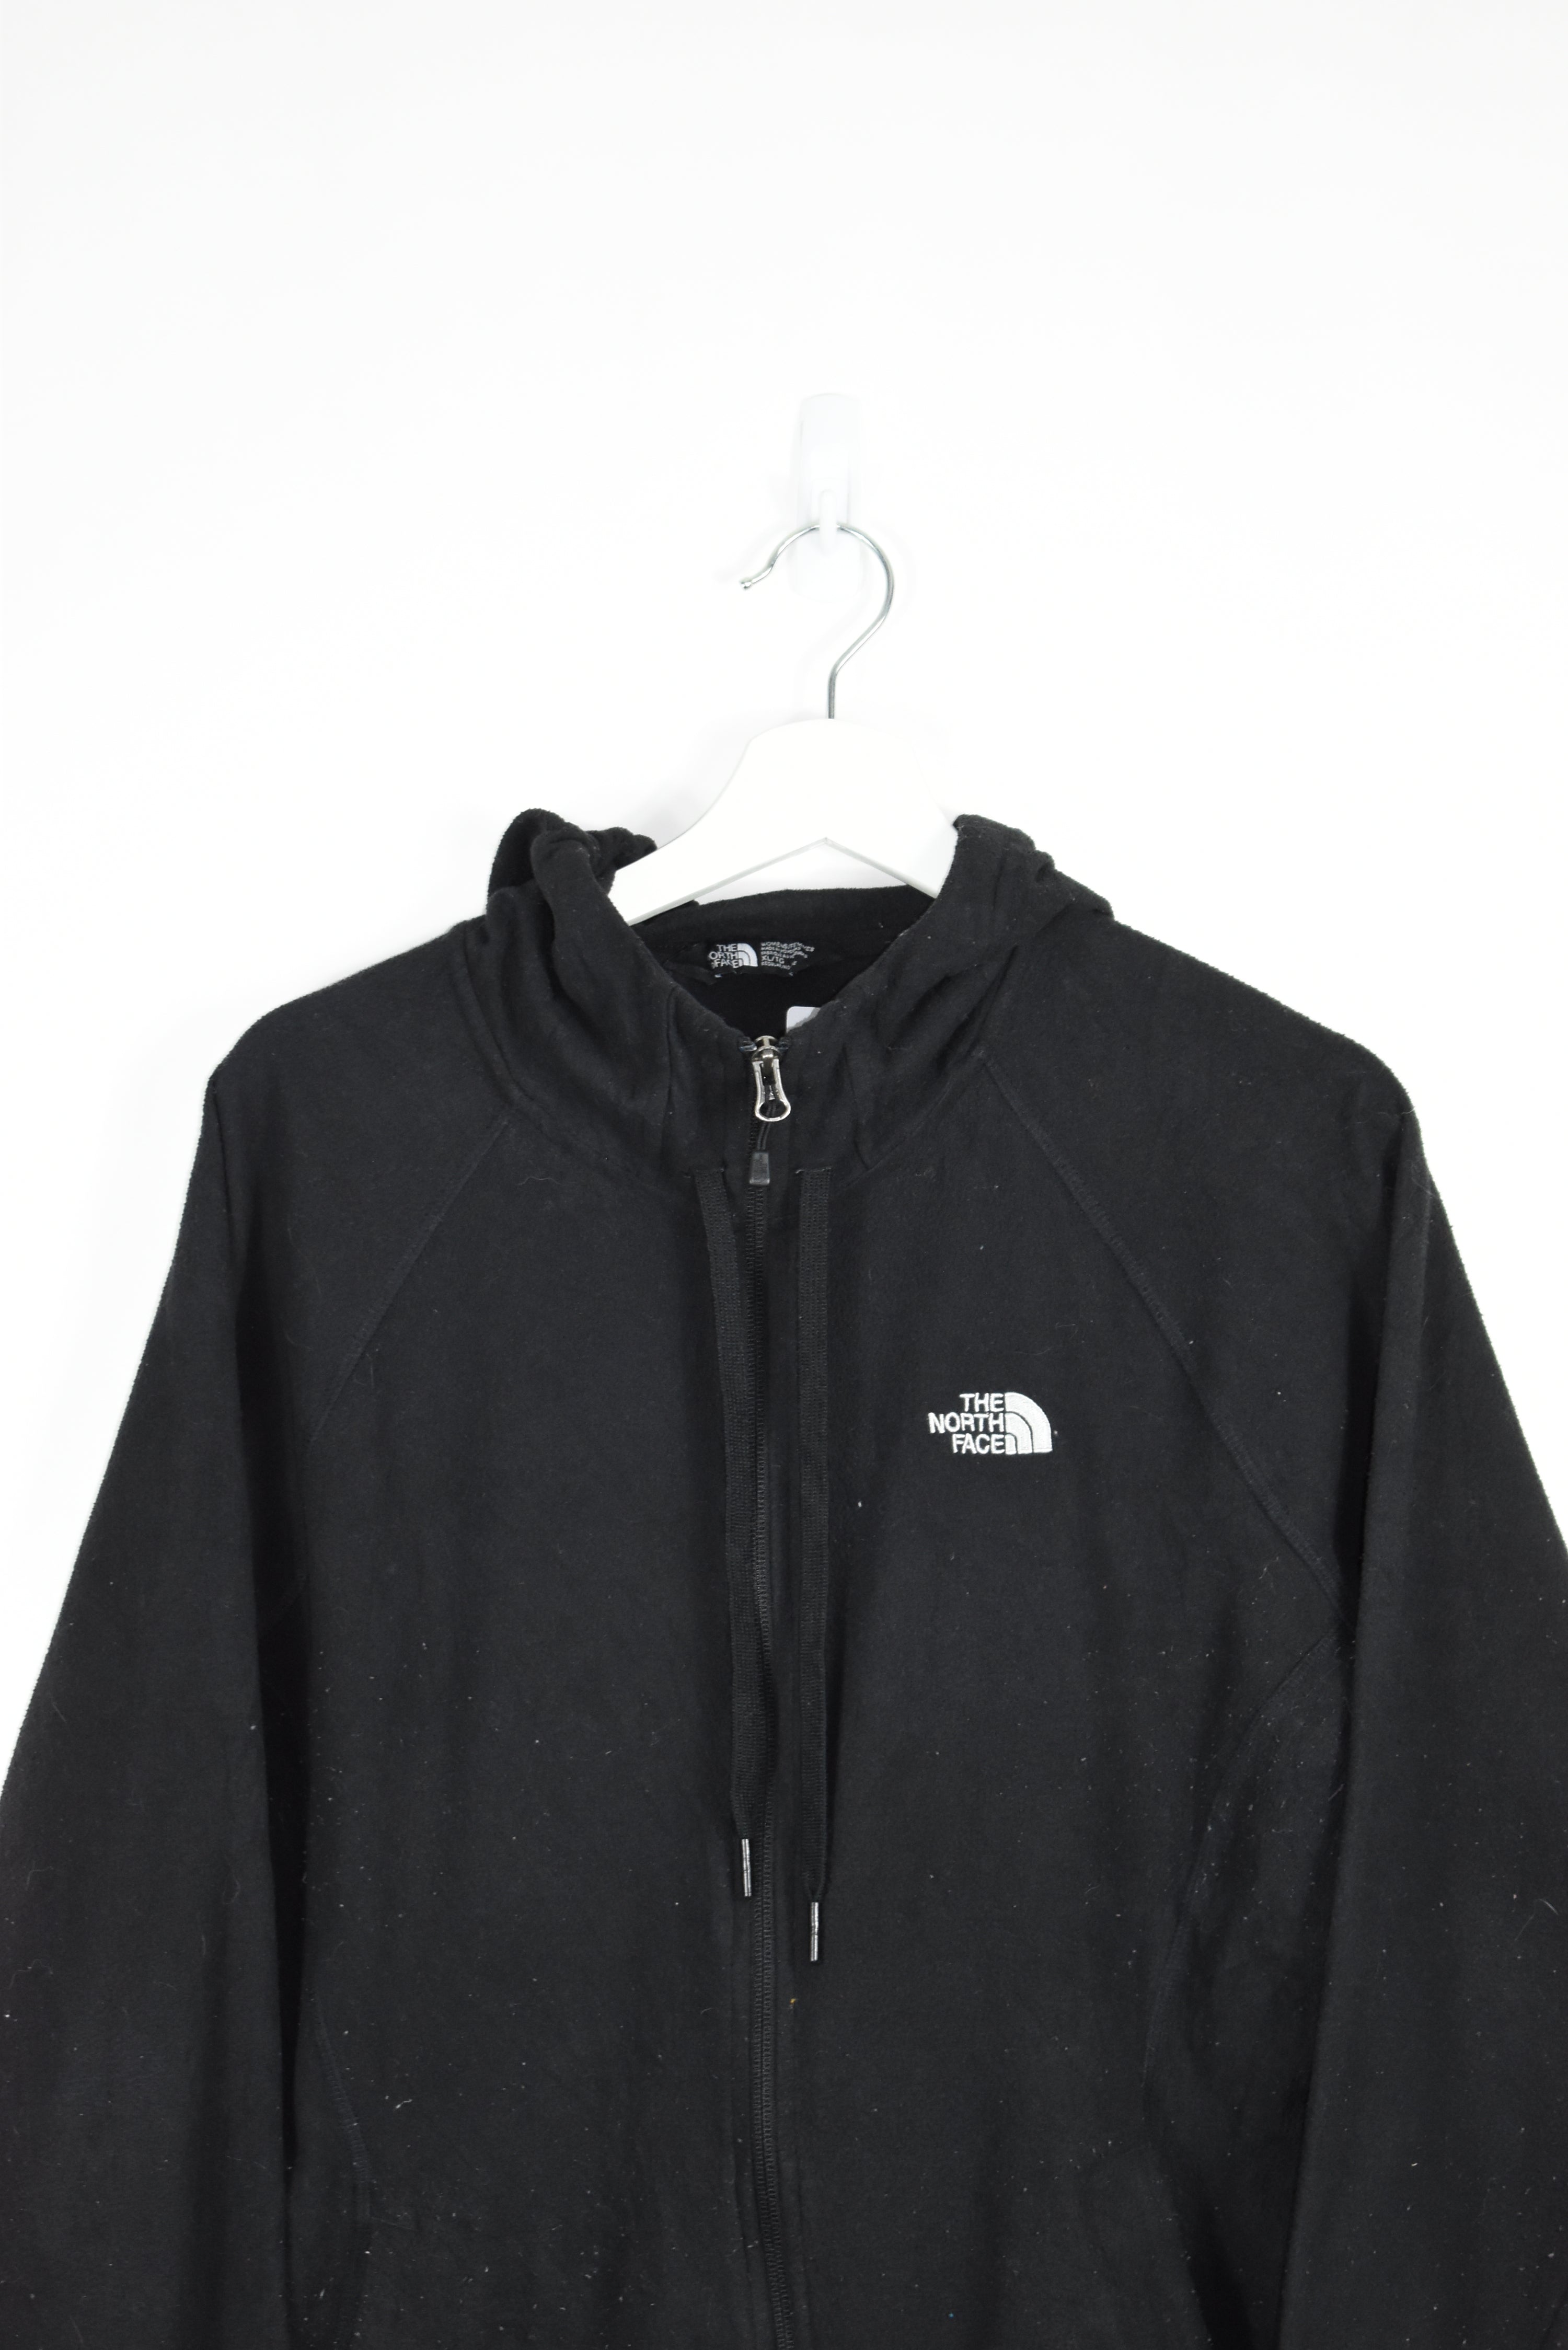 Vintage North Face Hooded Fleece SMALL